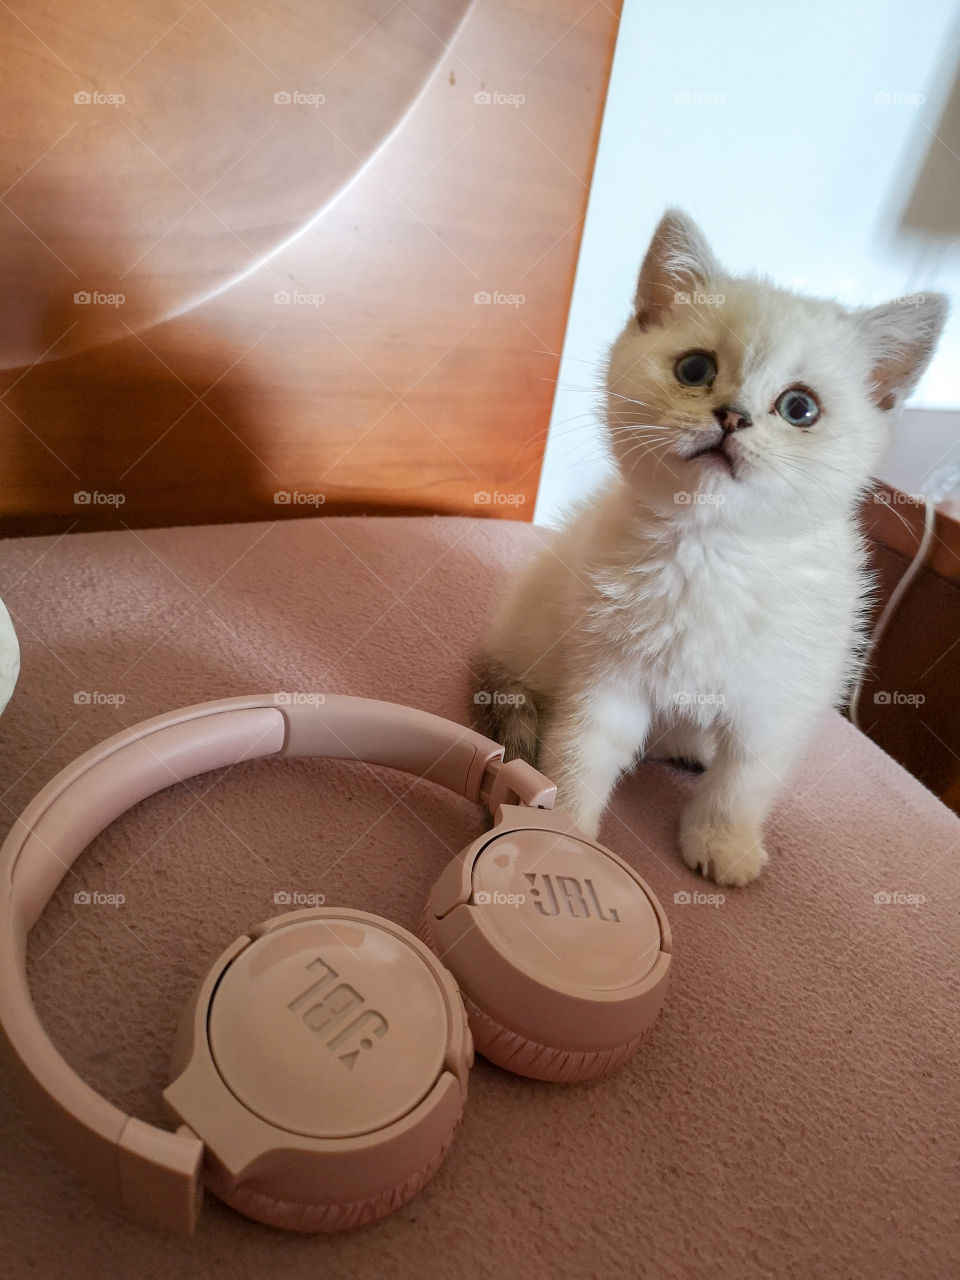 My cat and my JBL